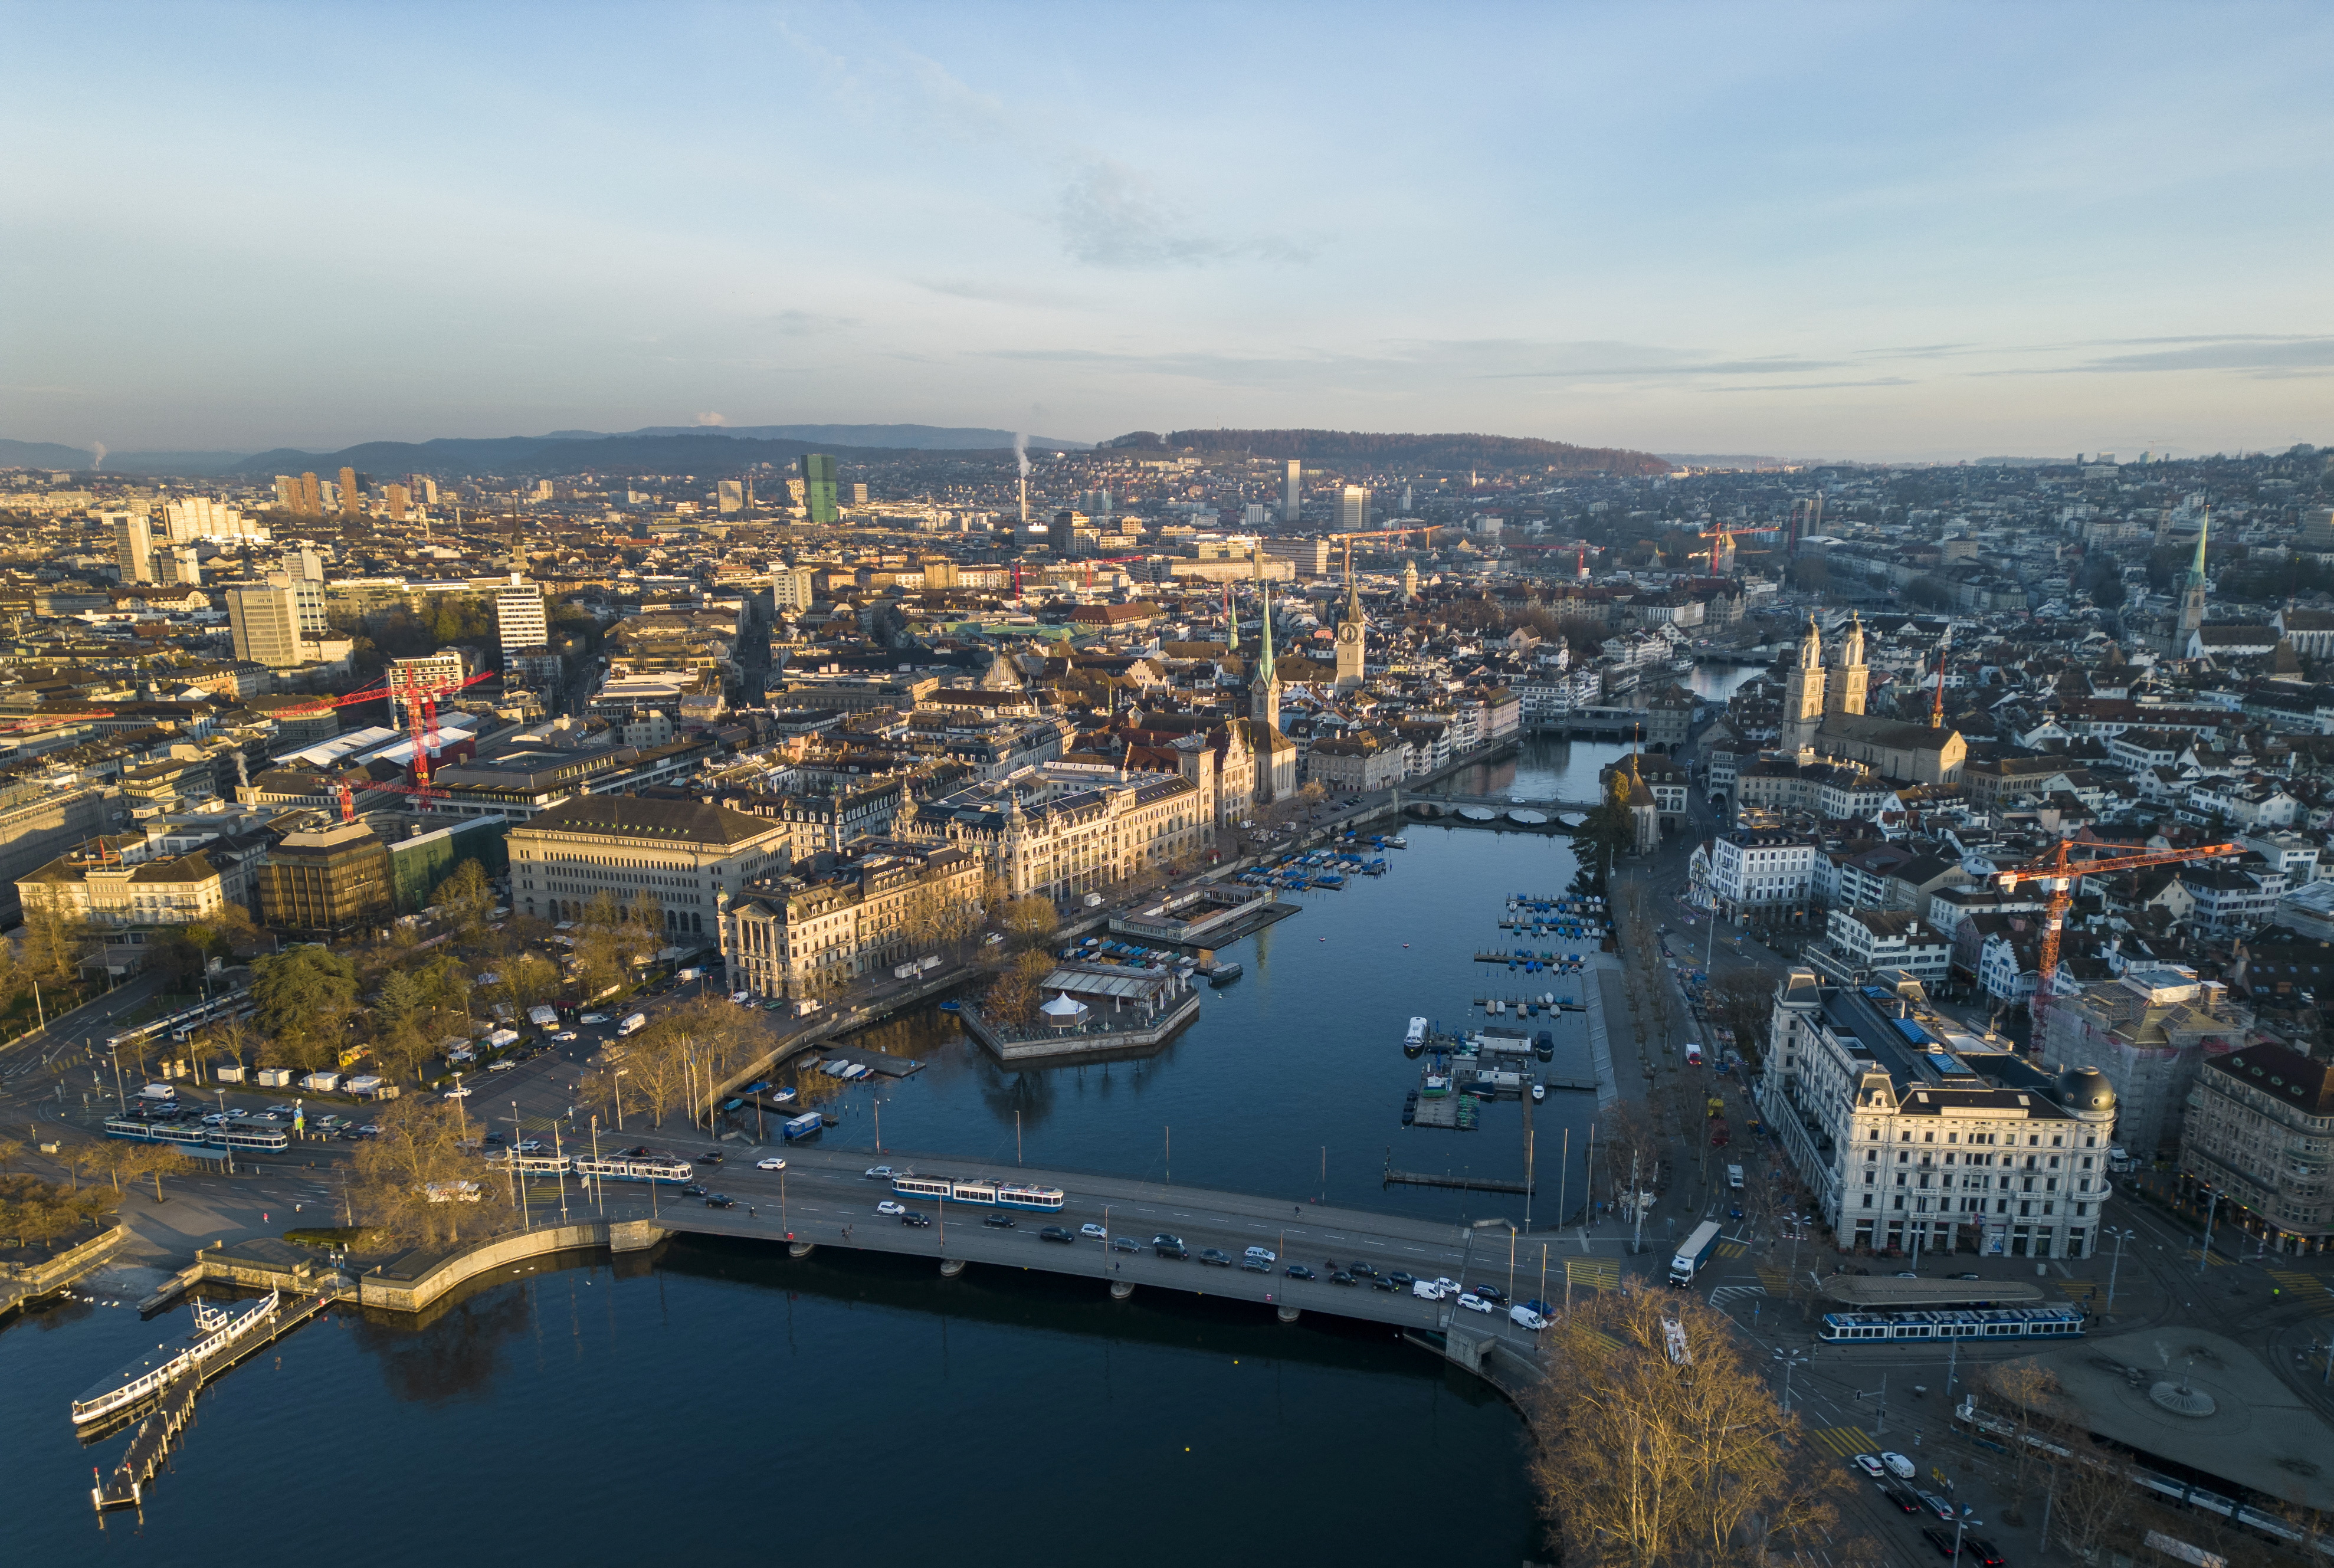 The Limmat river and the city are seen early morning in Zurich